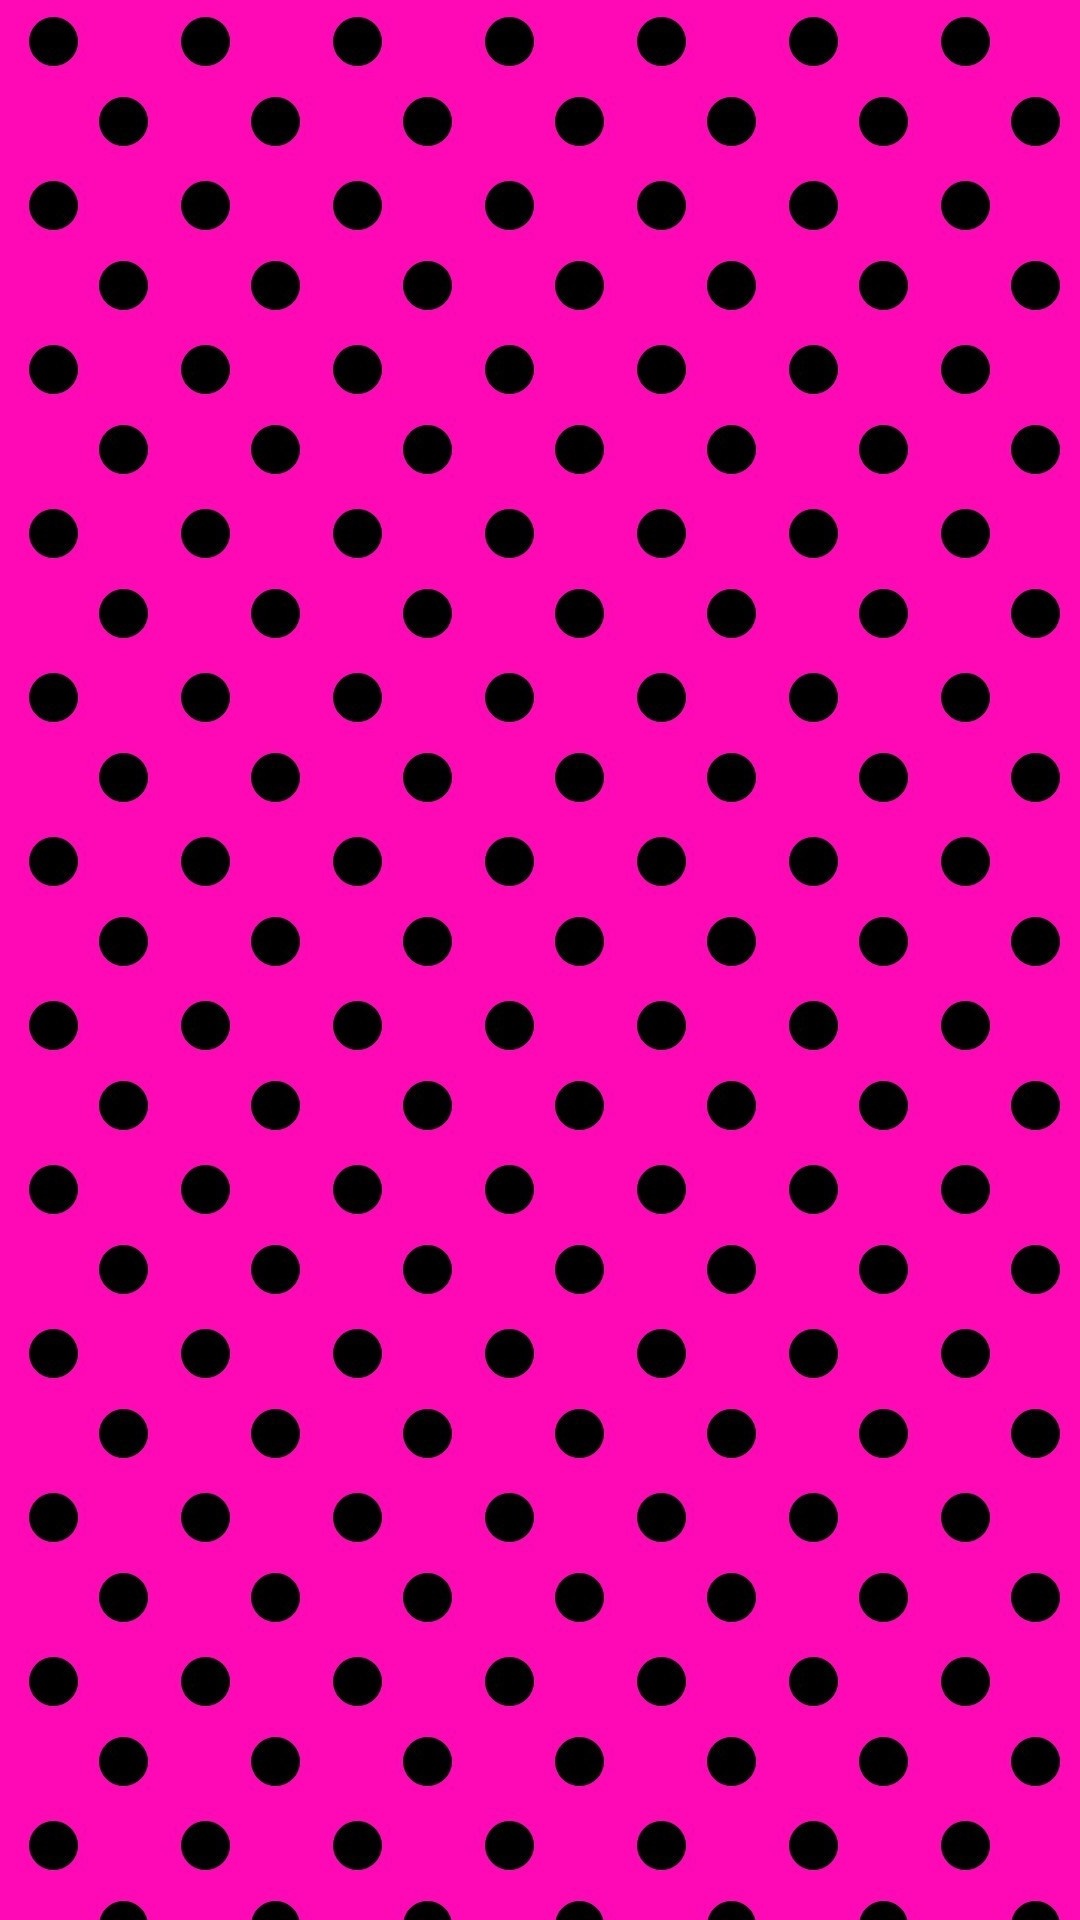 Polka Dot, Pink color palette, Elegant and stylish, Girly vibes, 1080x1920 Full HD Phone